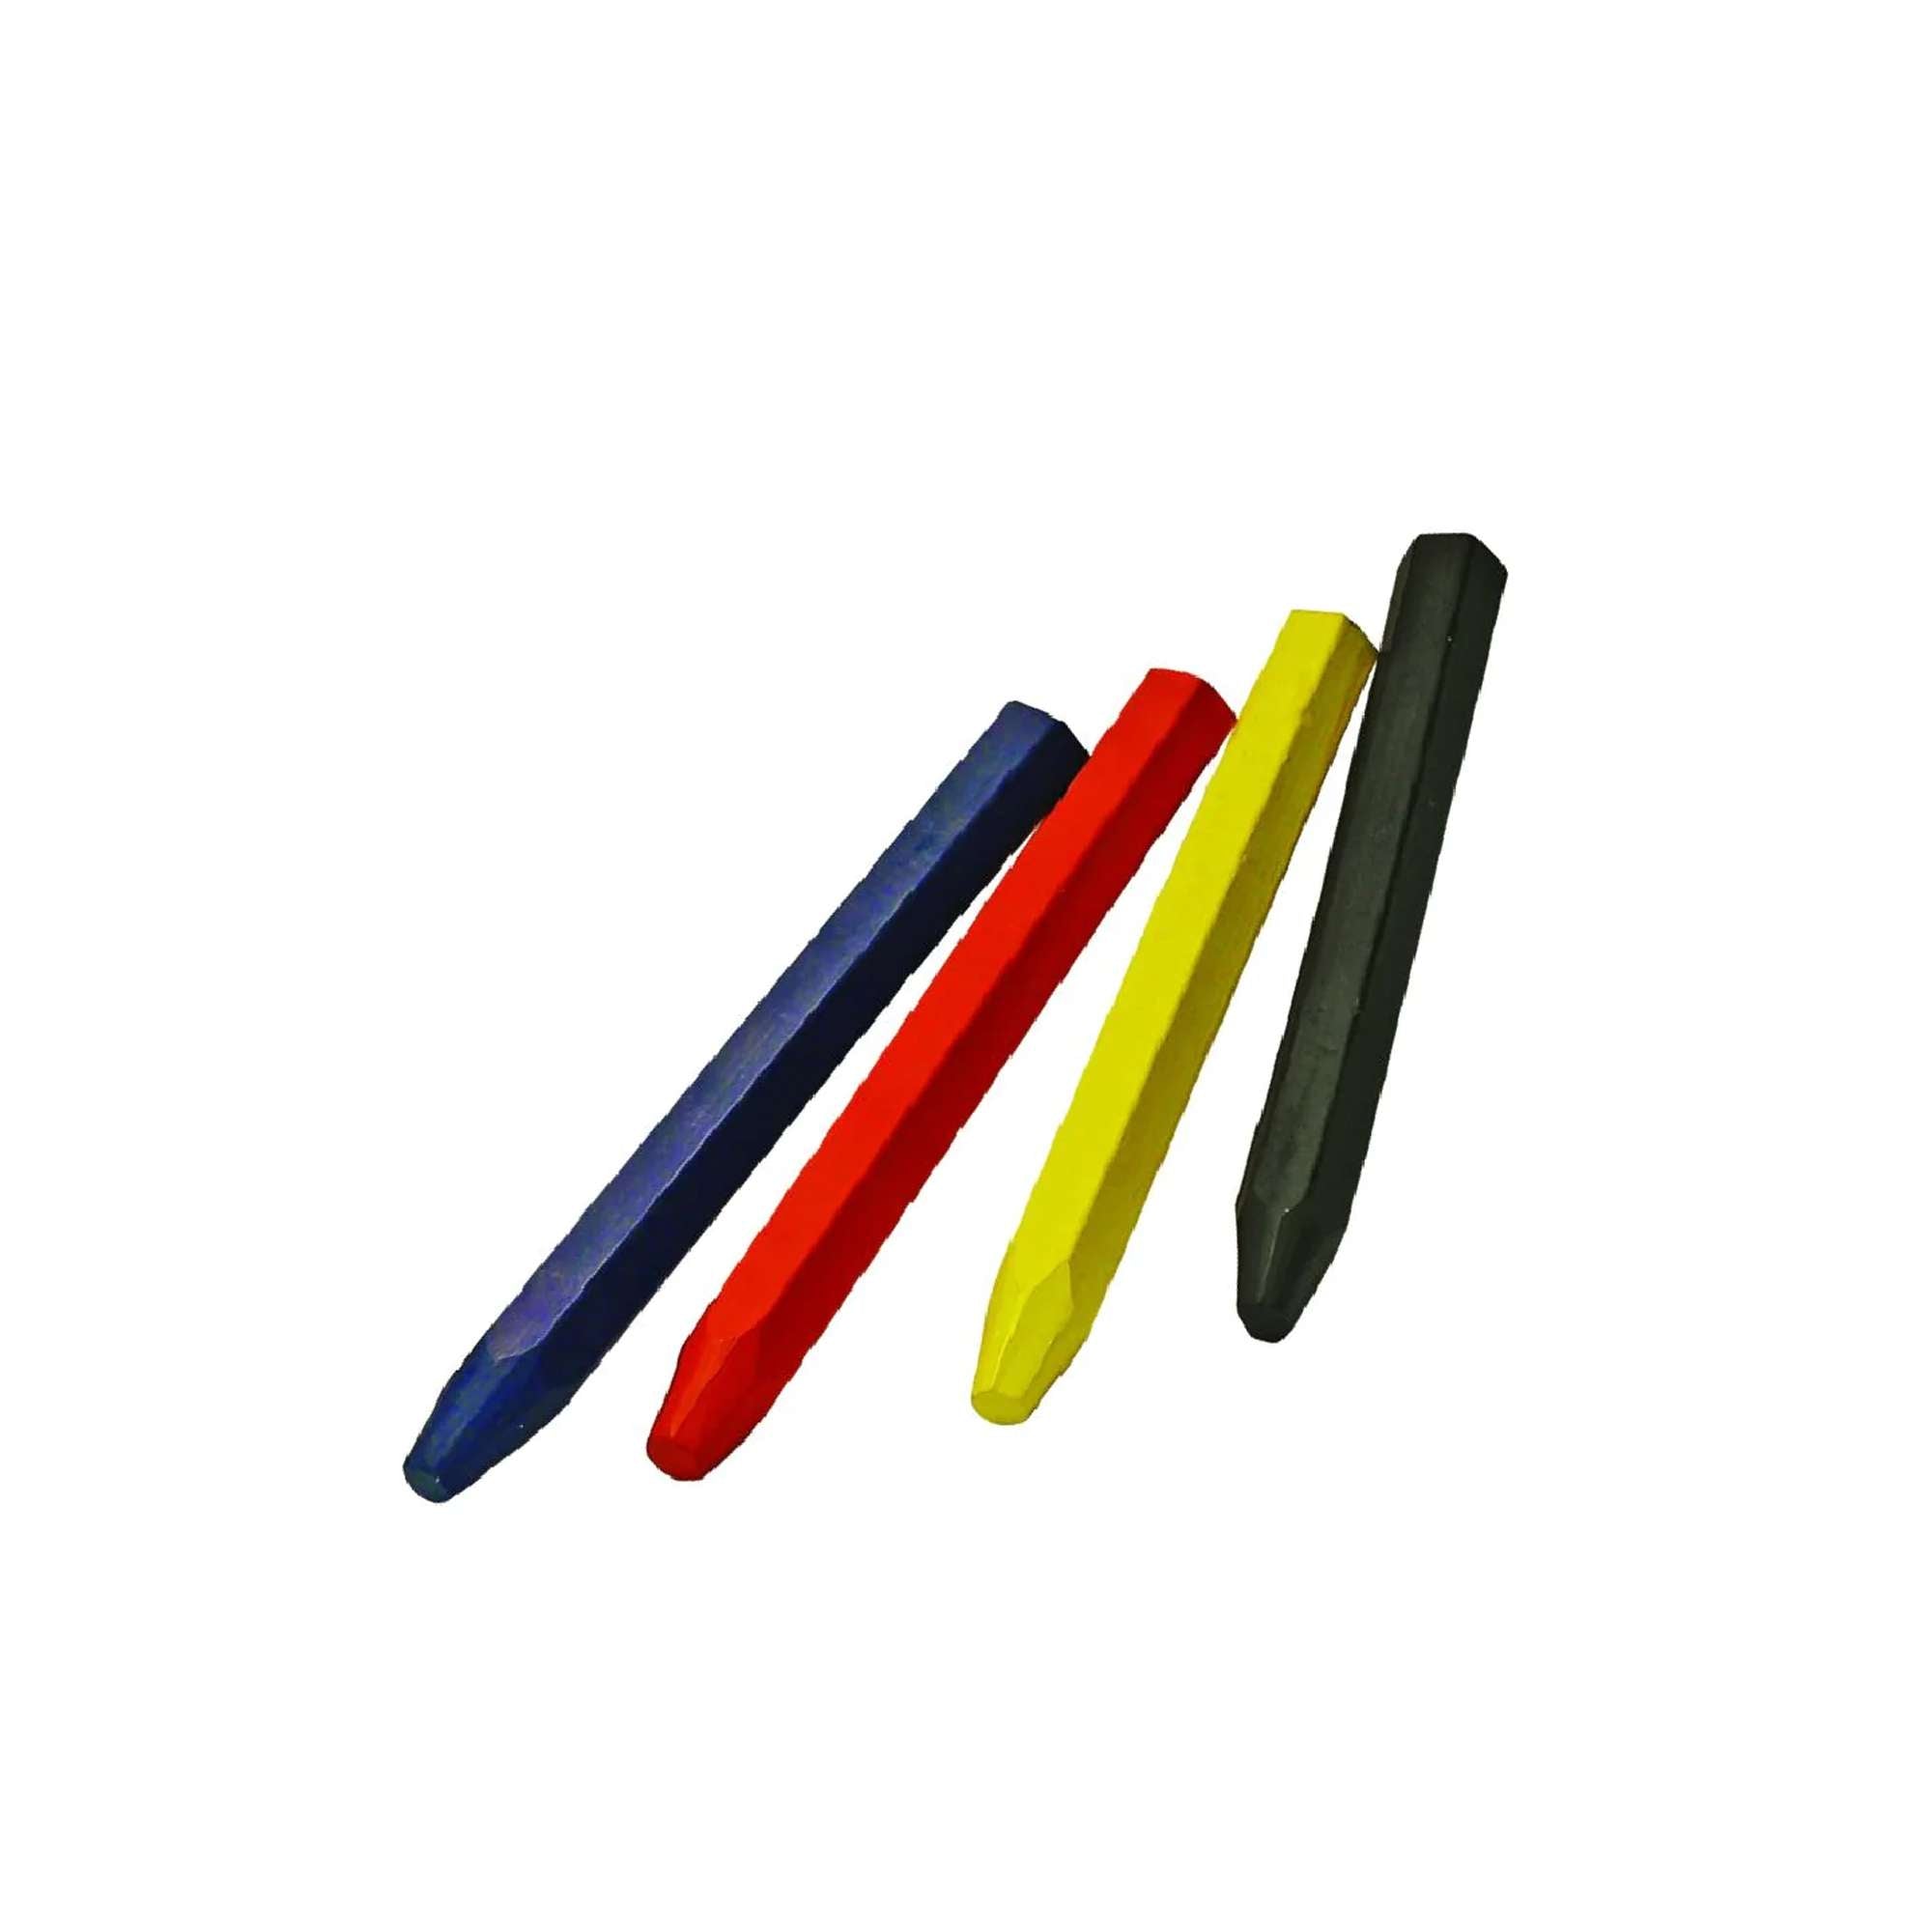 Industrial hexagonal crayons red, blue, yellow conf. 12pcs - Metrica